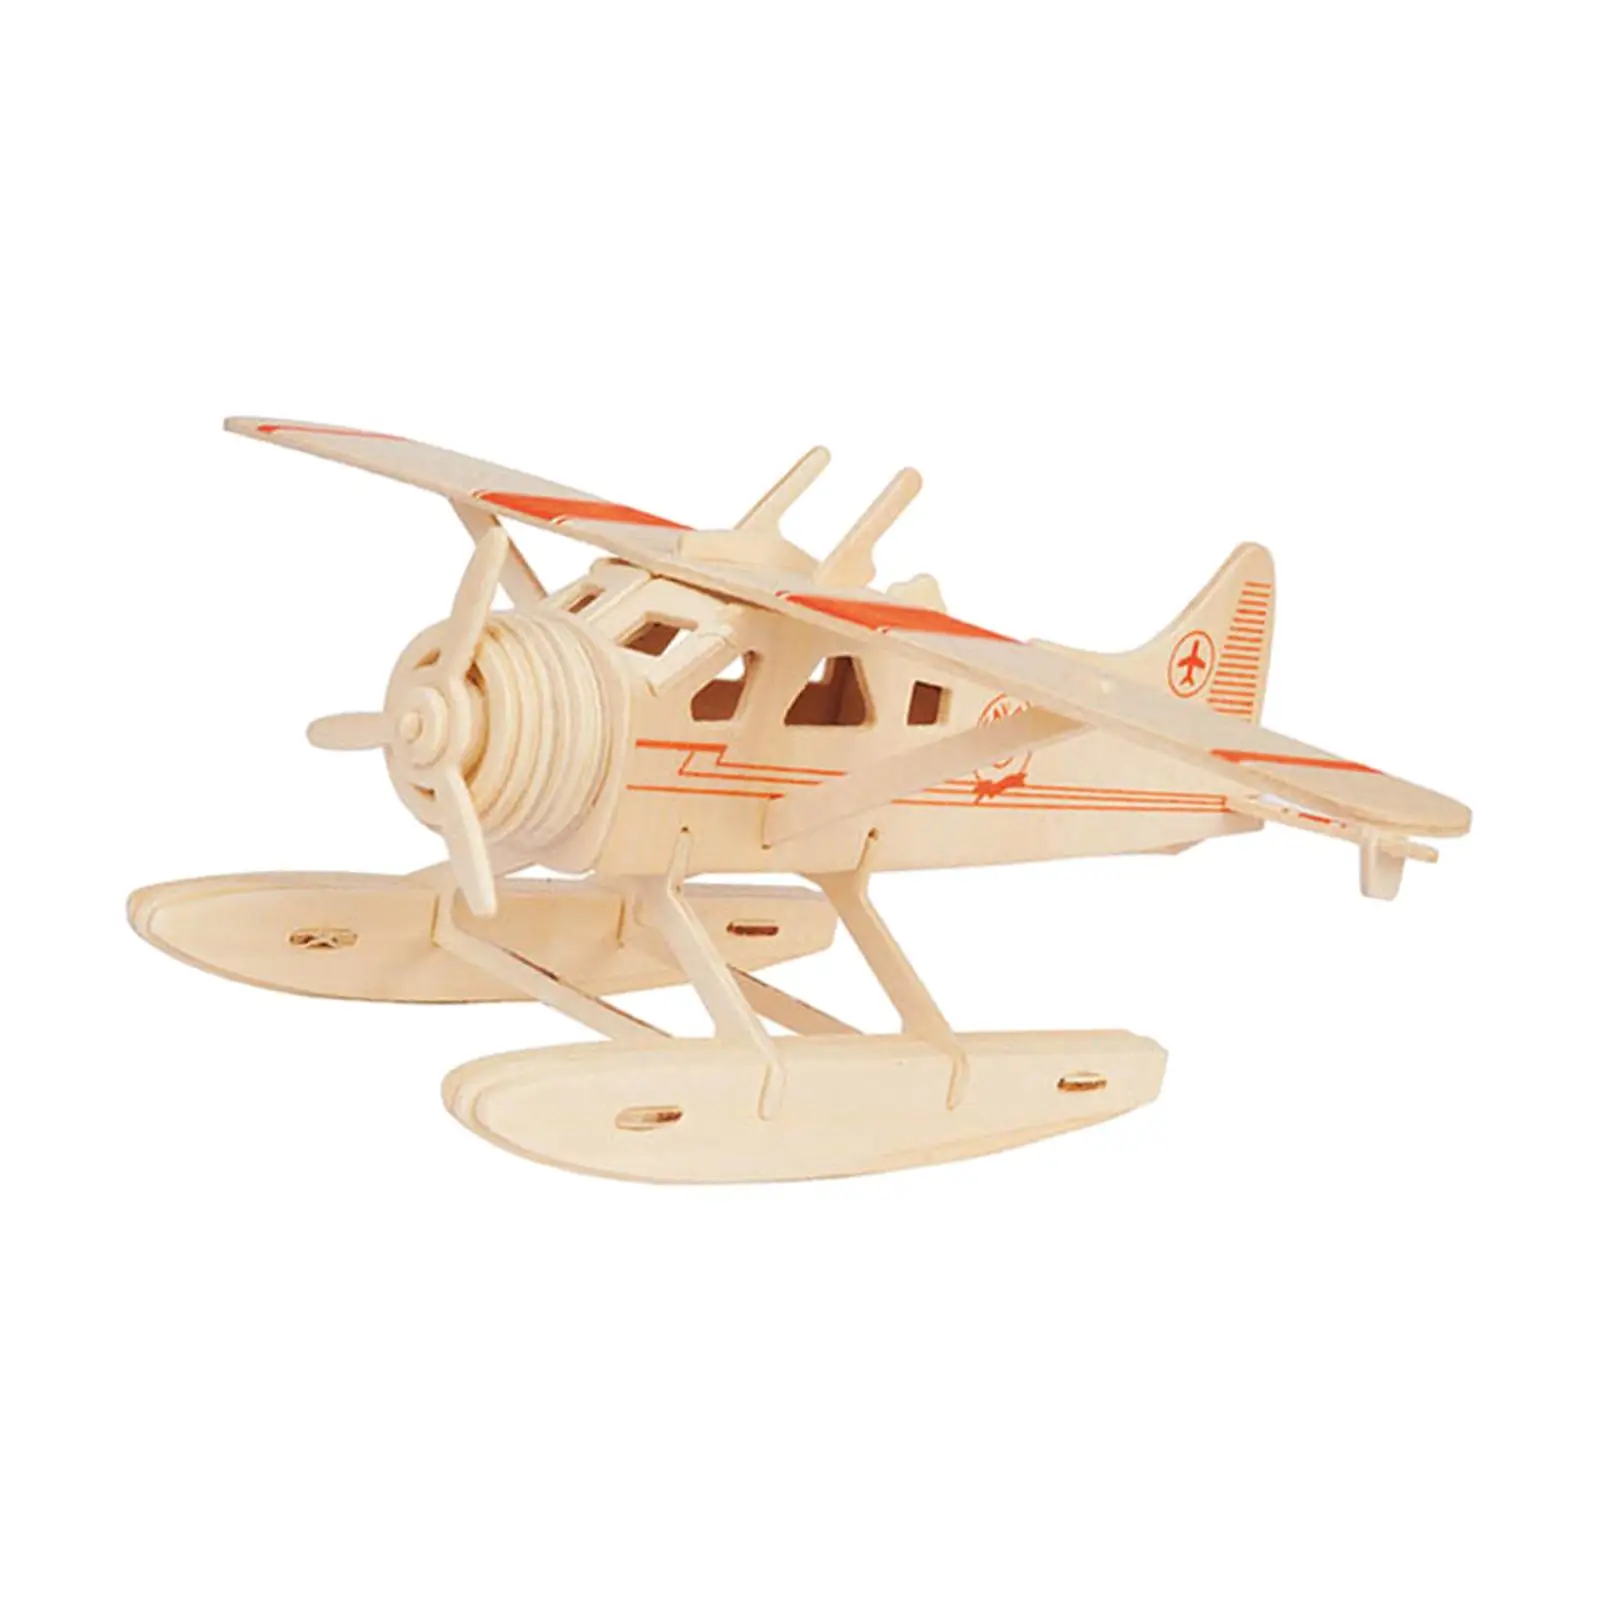 

DIY Assemble Wooden Puzzles Aircraft Wood Plane Craft Building Model Kits for Kids Adults Friends Ages 7 8 9 10 Years Old